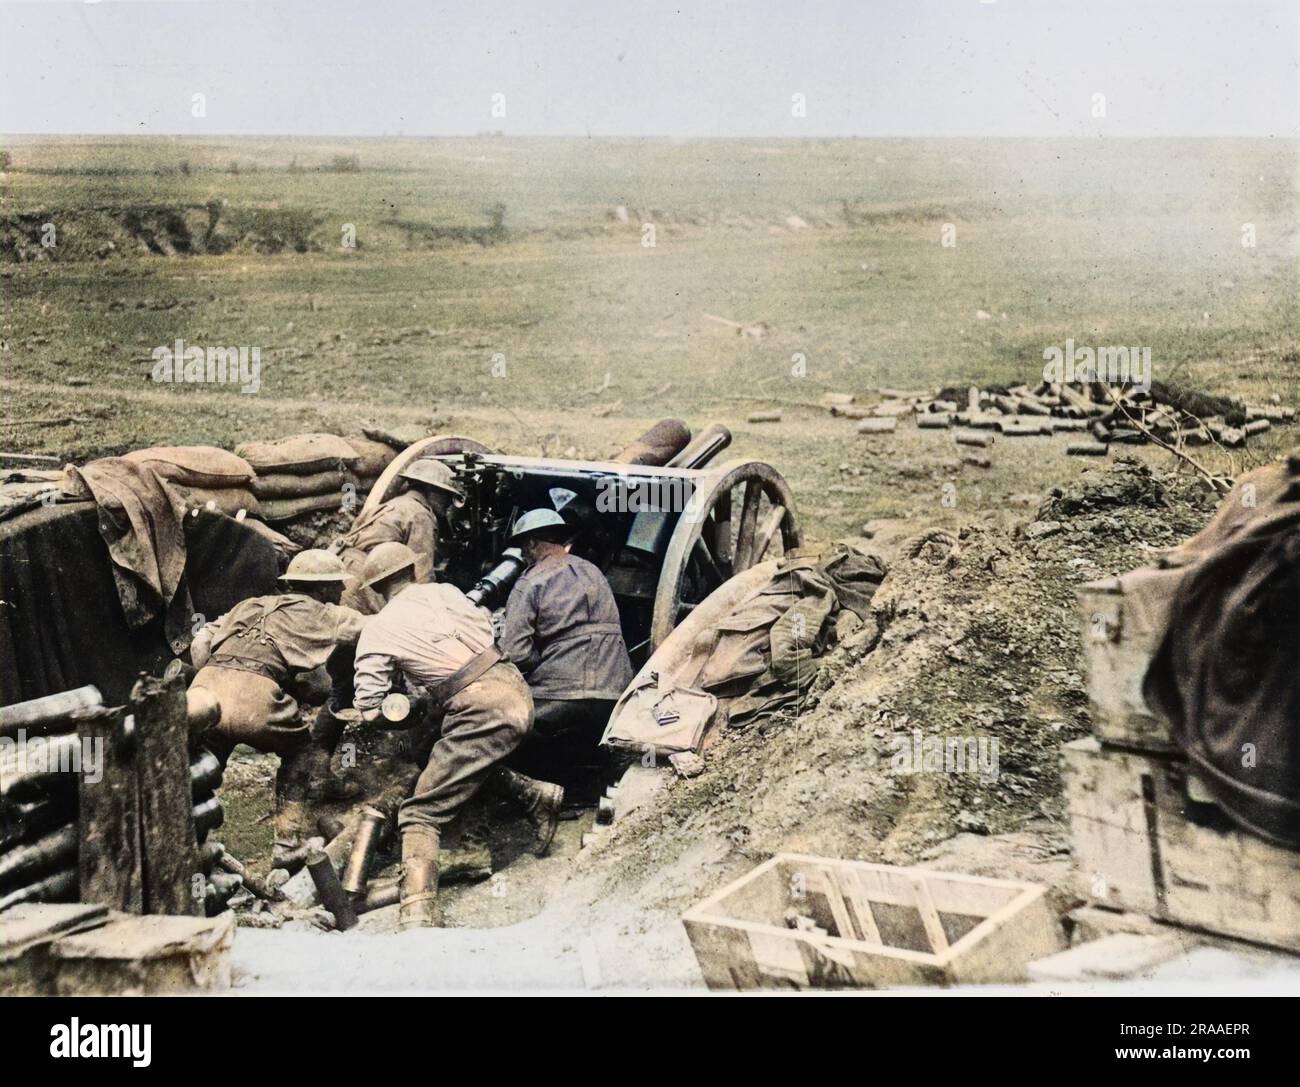 Australian soldiers loading an 18 pounder gun at the second Battle of Bullecourt (Battle of Arras) on the Western Front in France during World War I in May 1917     Date: May-17 Stock Photo